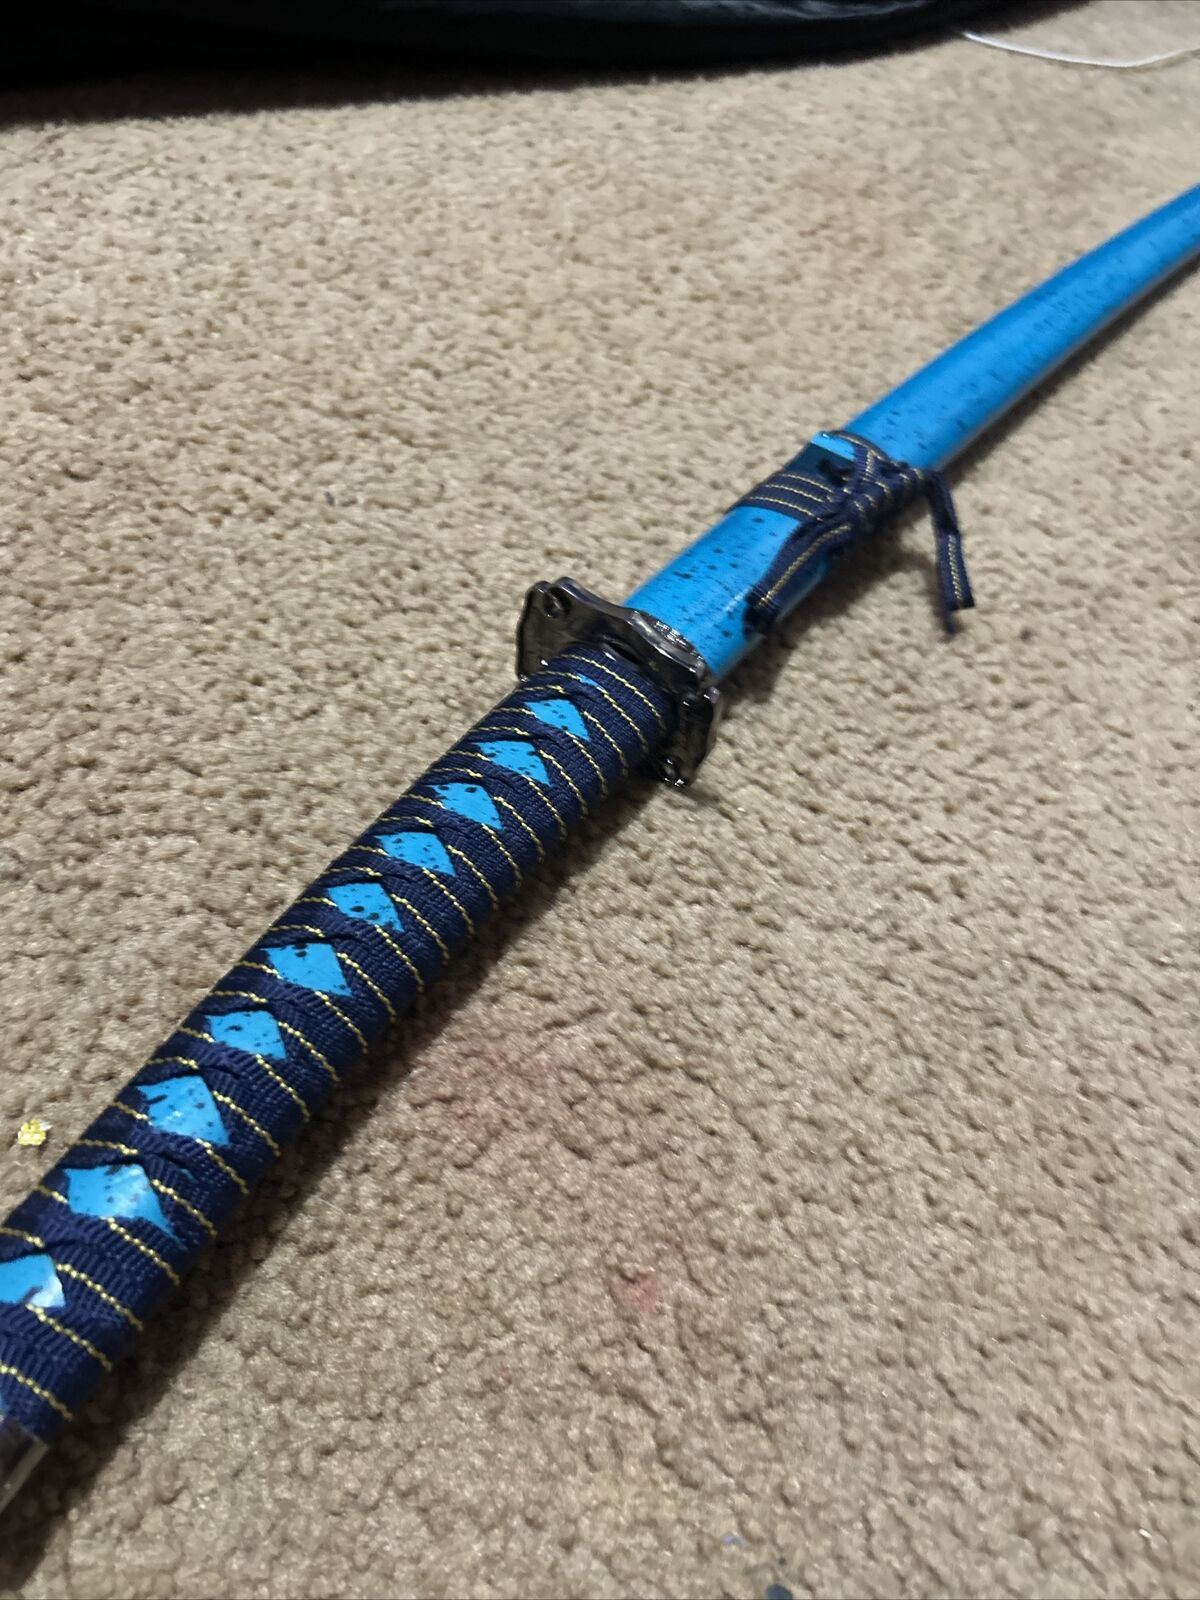 Blue turquoise black spotted sword